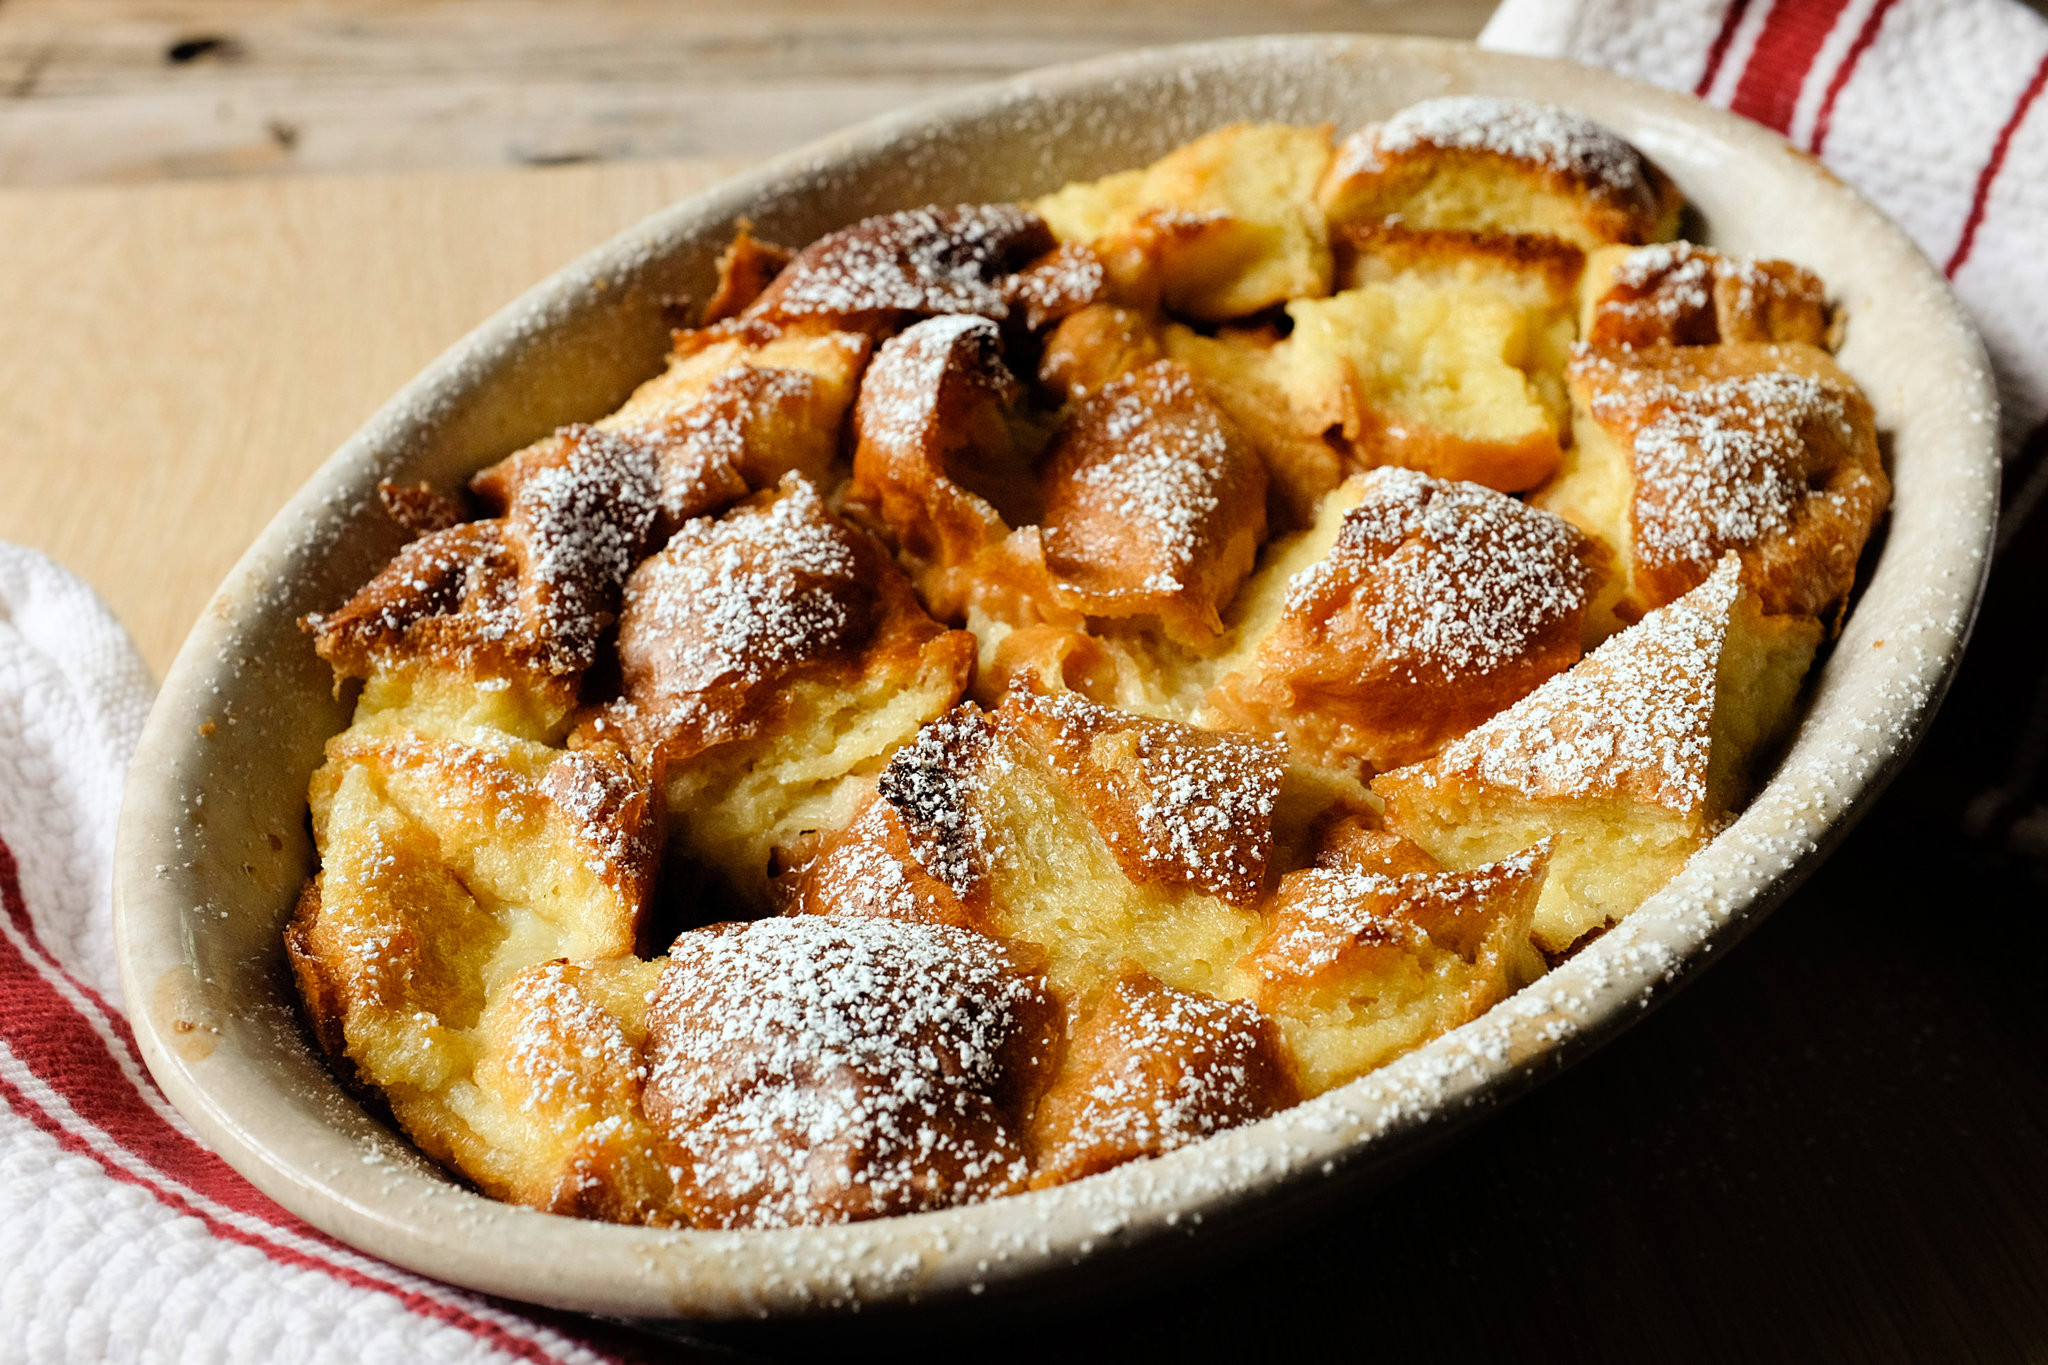 Recipe for Bread Pudding Inspirational Simple Bread Pudding Recipe Nyt Cooking